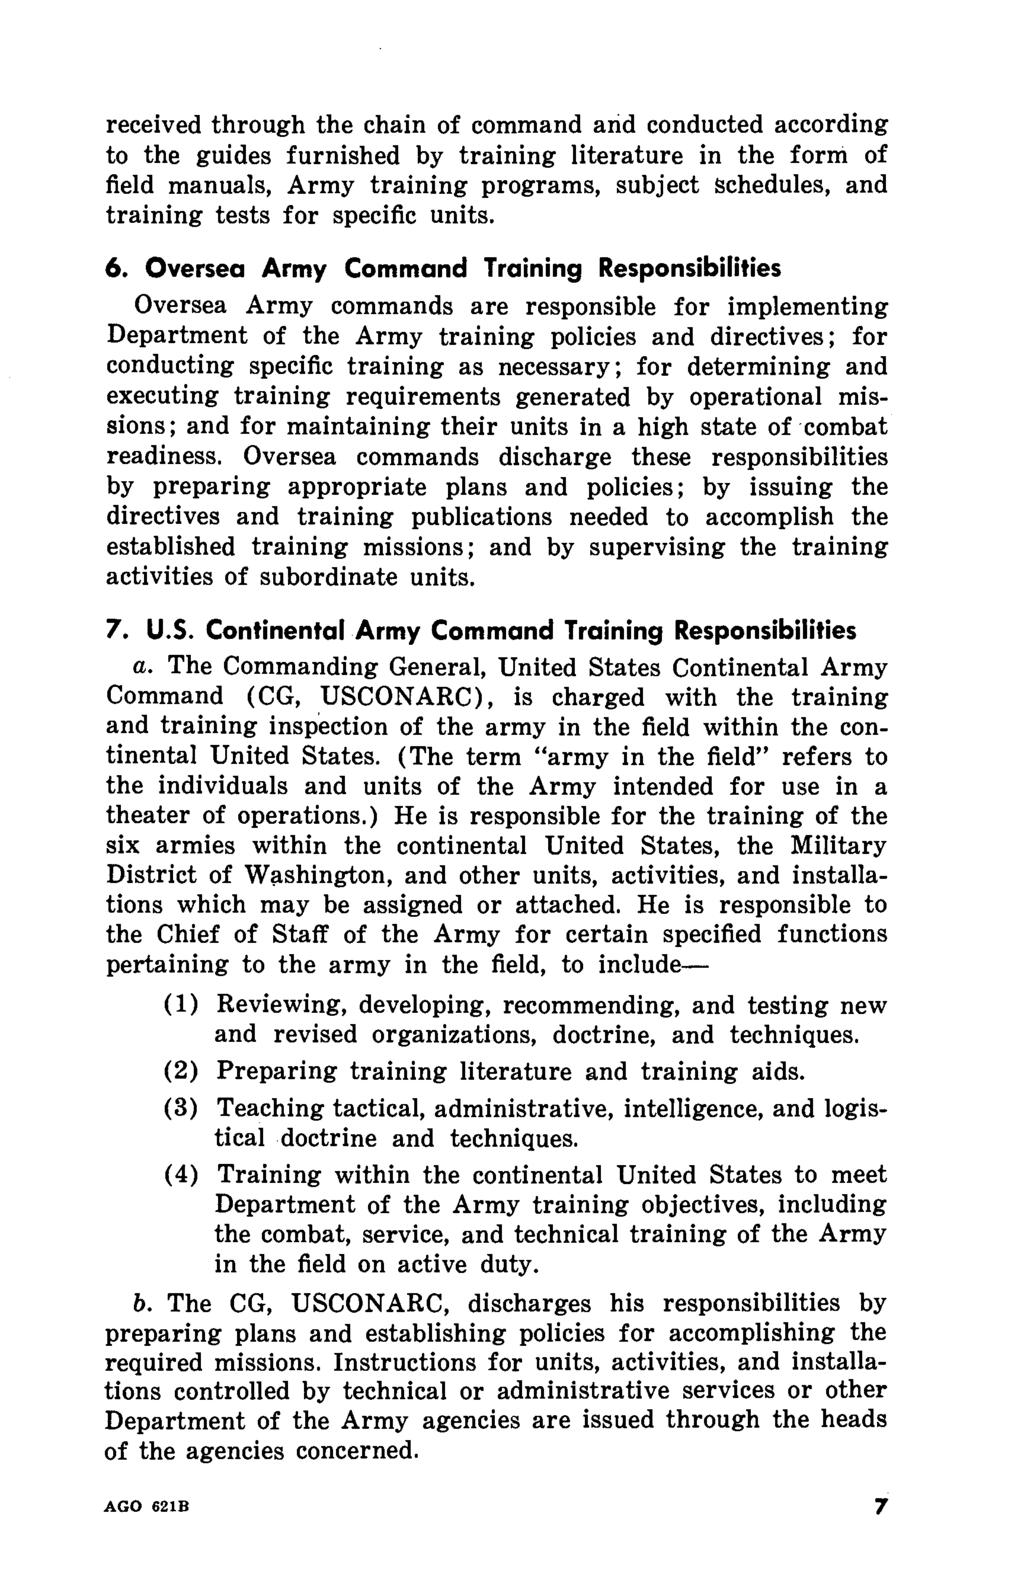 received through the chain of command and conducted according to the guides furnished by training literature in the form of field manuals, Army training programs, subject schedules, and training